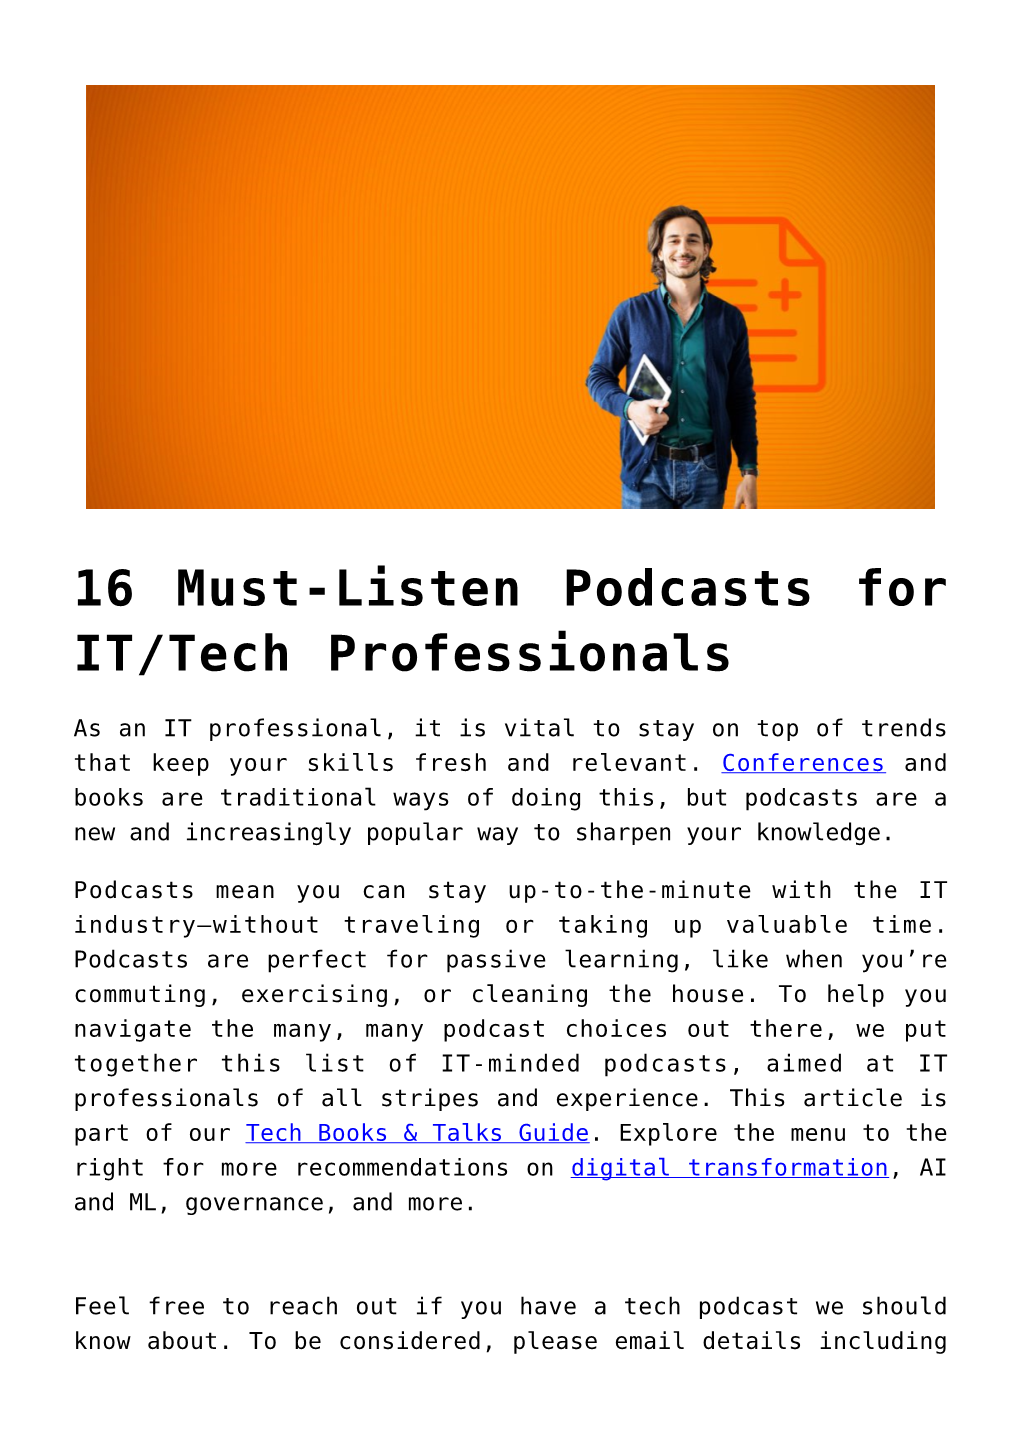 16 Must-Listen Podcasts for IT/Tech Professionals